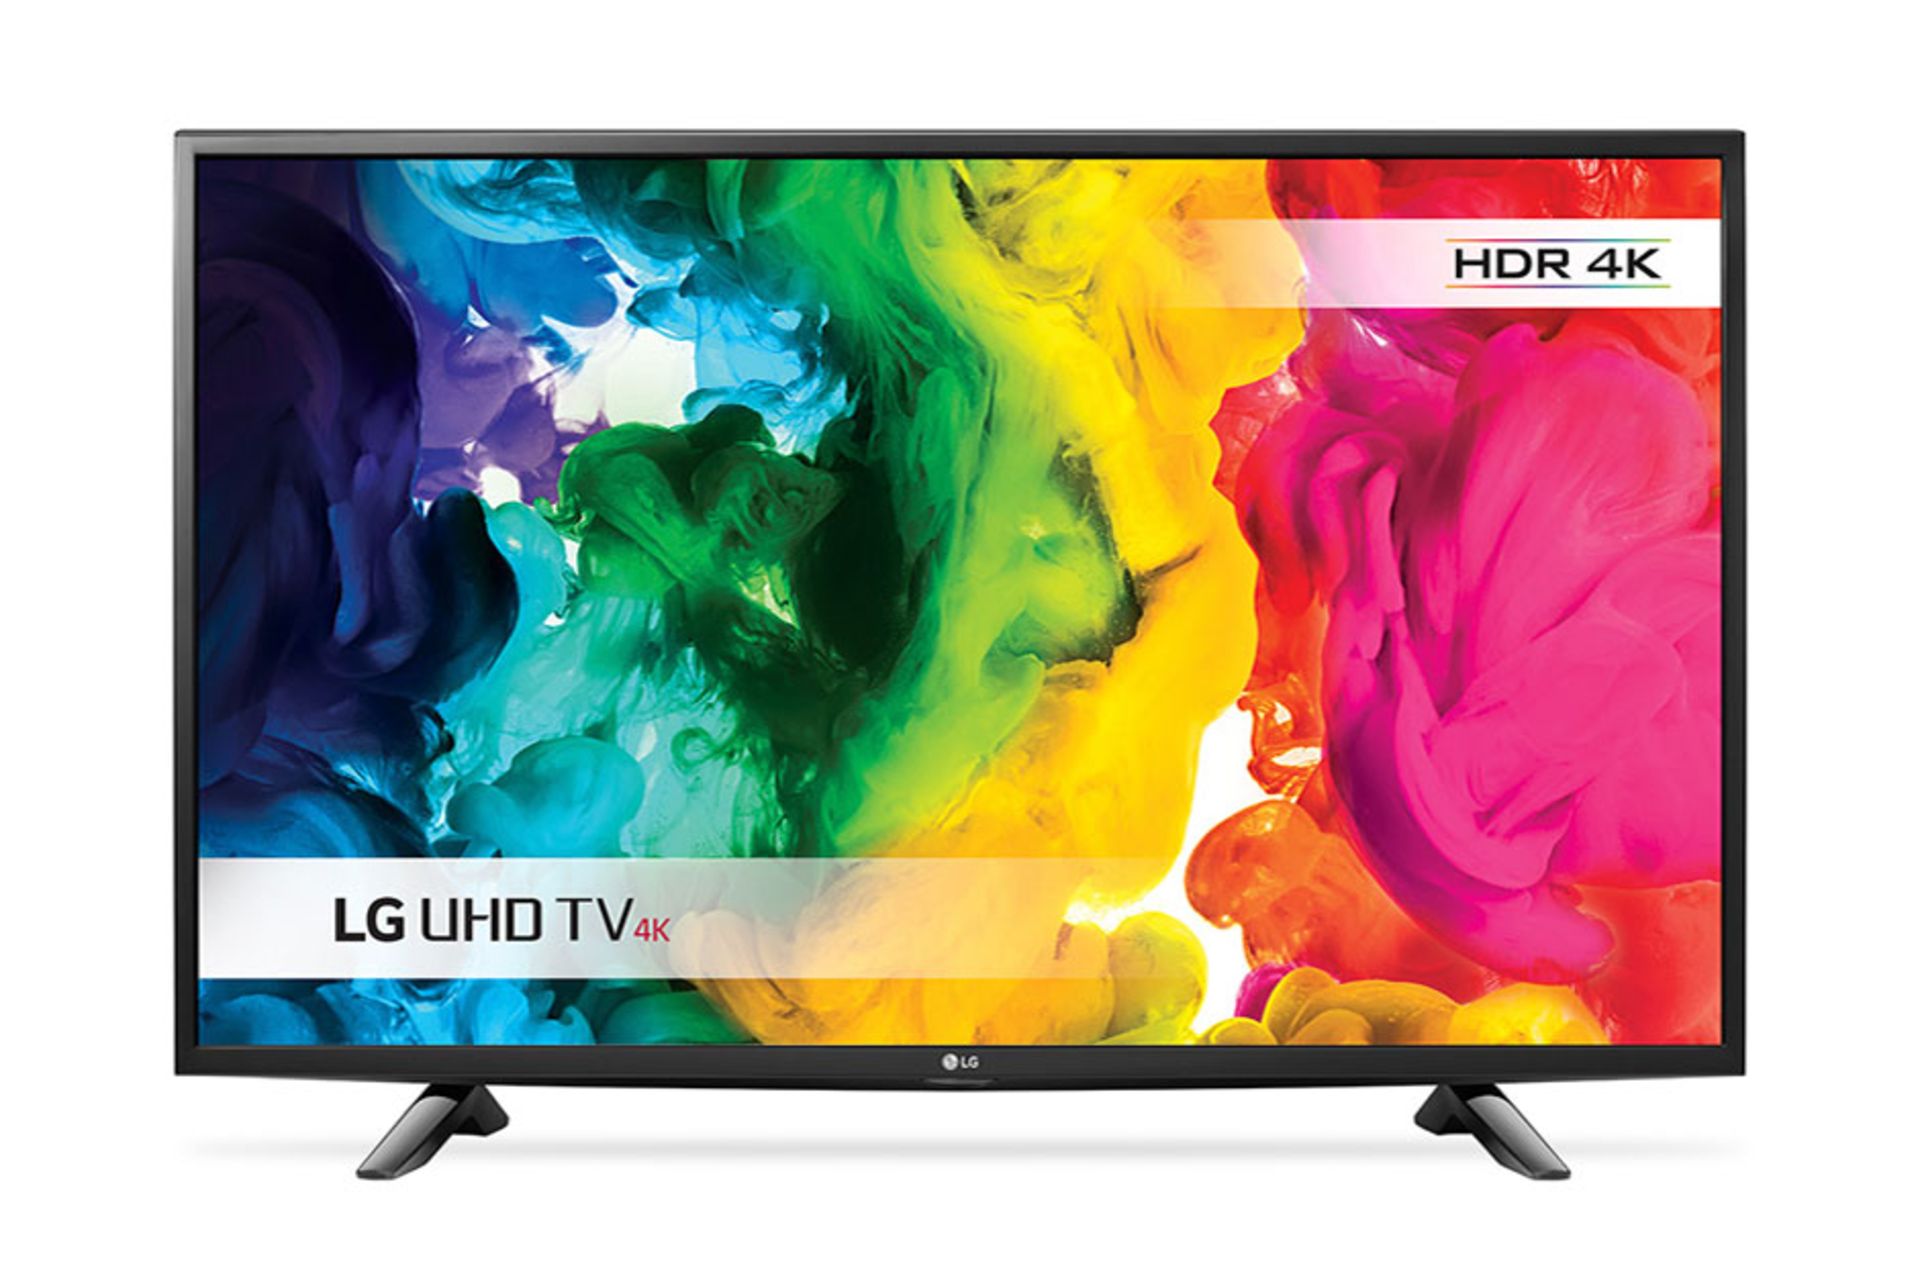 V Grade A LG 49" 49UH603V 4K HDR Ultra HD LED TV - Freeview HD - Smart TV - WebOS - WiFi Built In - Image 2 of 3